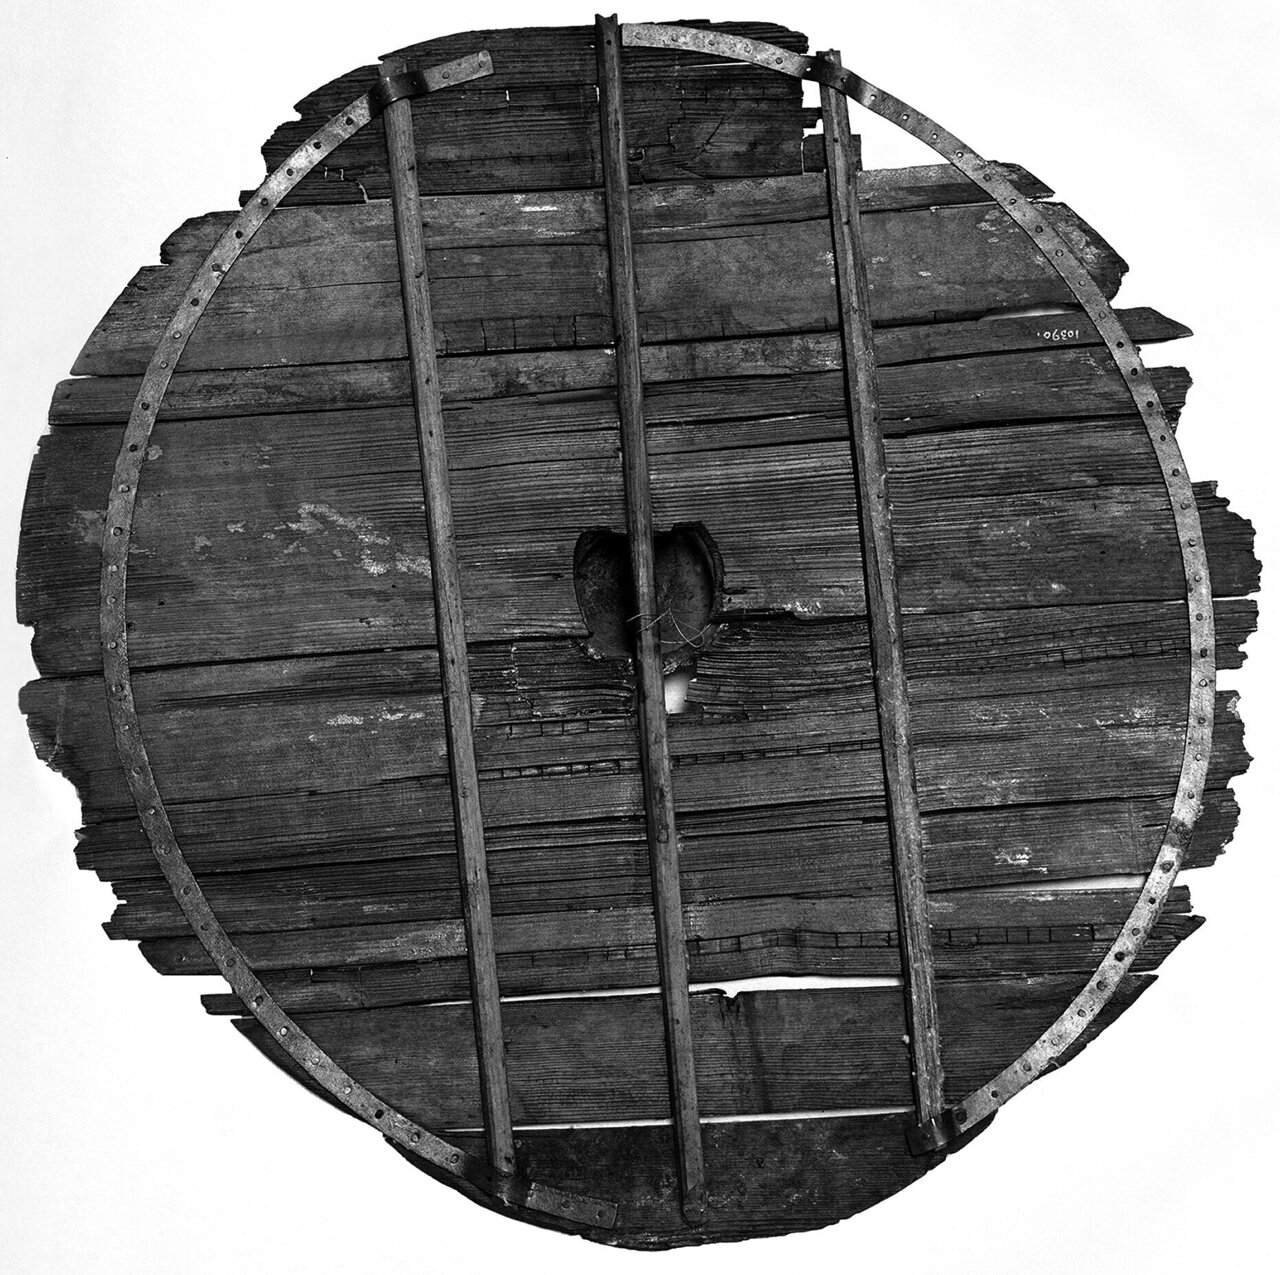 Shield 'reconstruction' cobbled together in the late 19th–early 20th century. The shield is reinforced with modern steel frames but comprised of original boards. The central board is seemingly equipped with a roughly heart-shaped center hole. Photo: Museum of Cultural History, University of Oslo, Norway. Rotated 90 degrees clockwise by the author.